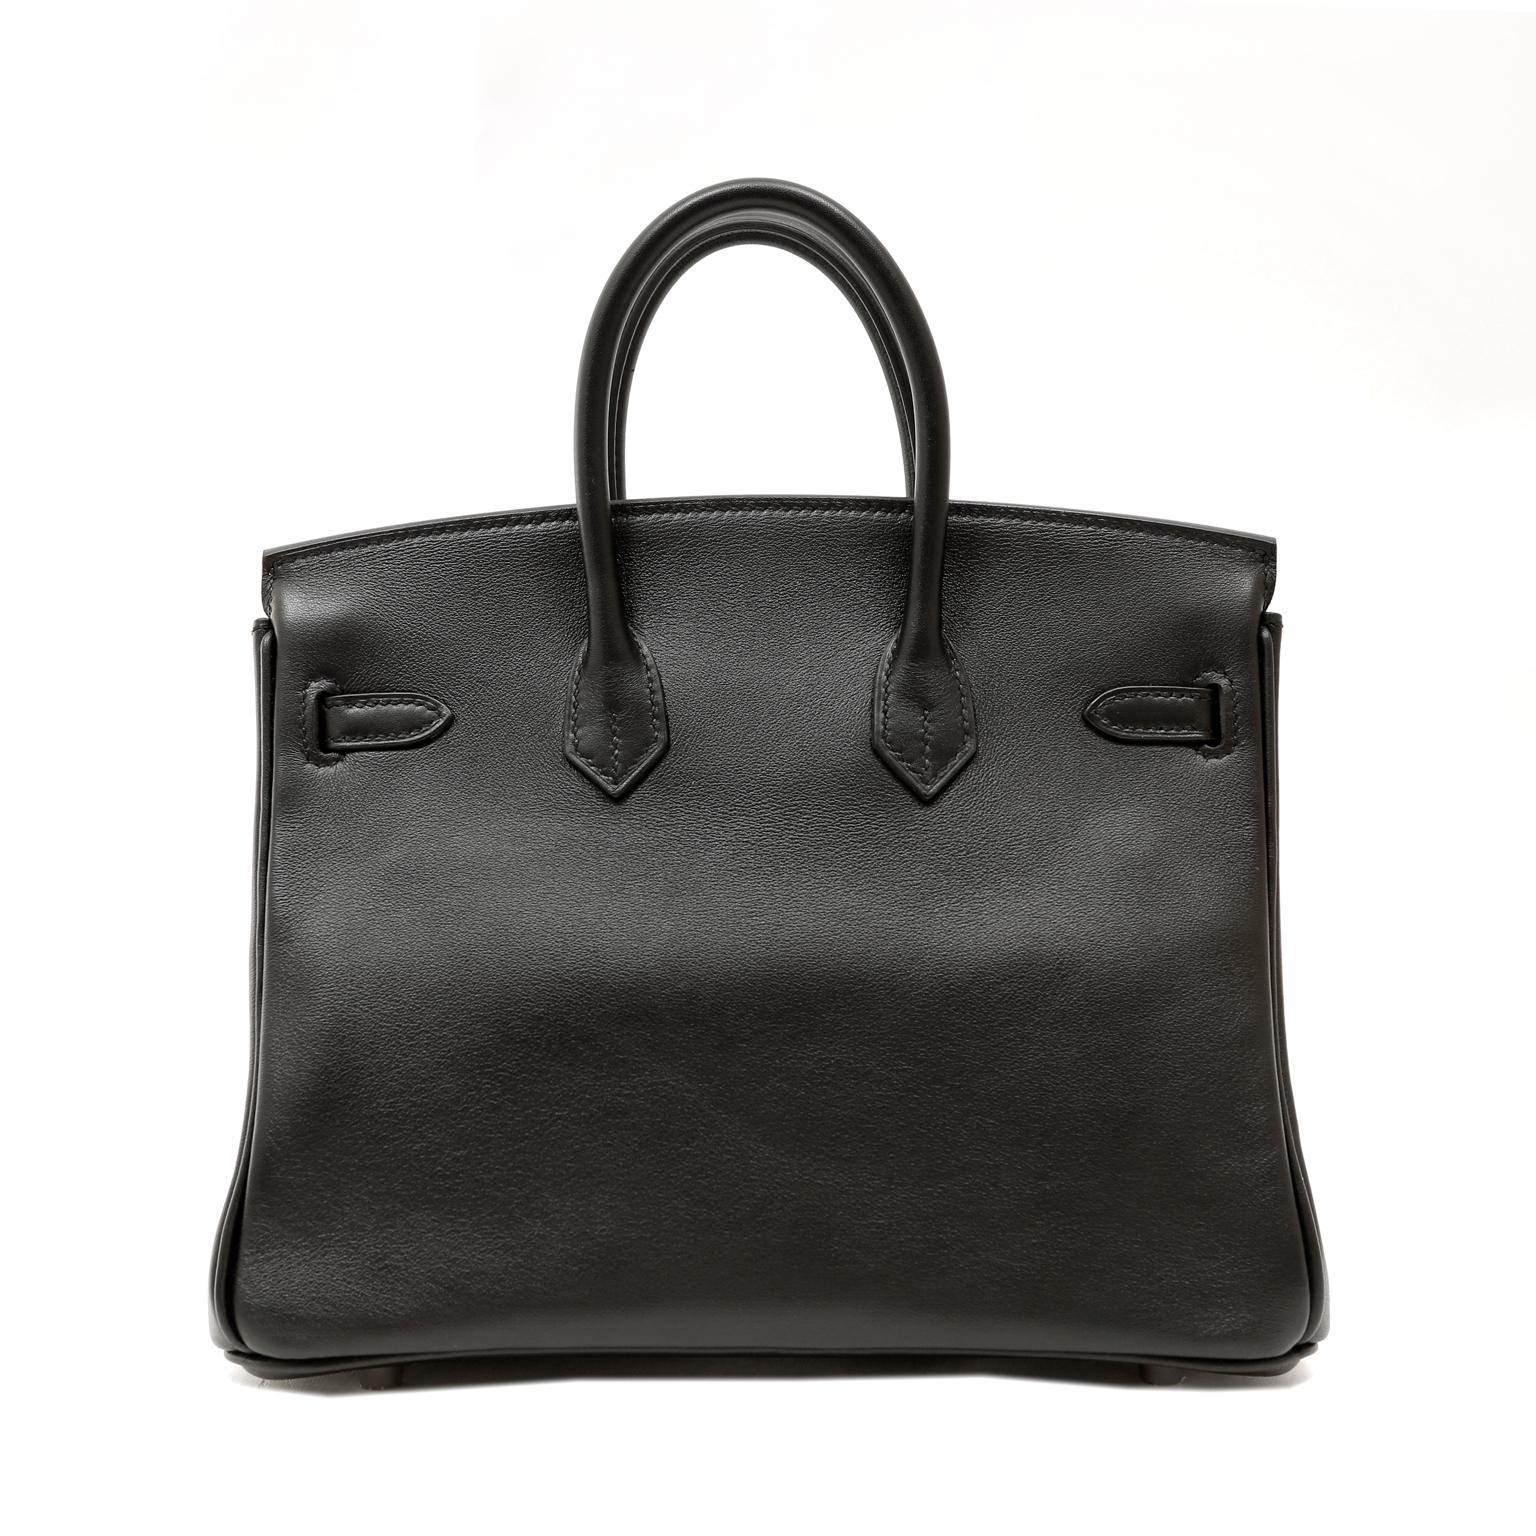 This authentic Hermès Black Swift Leather 25 cm Birkin Bag is in pristine unworn condition with plastic intact on the hardware.
Long waitlists are commonplace for the intensely coveted classic leather Birkin bag.  Each piece is hand crafted by